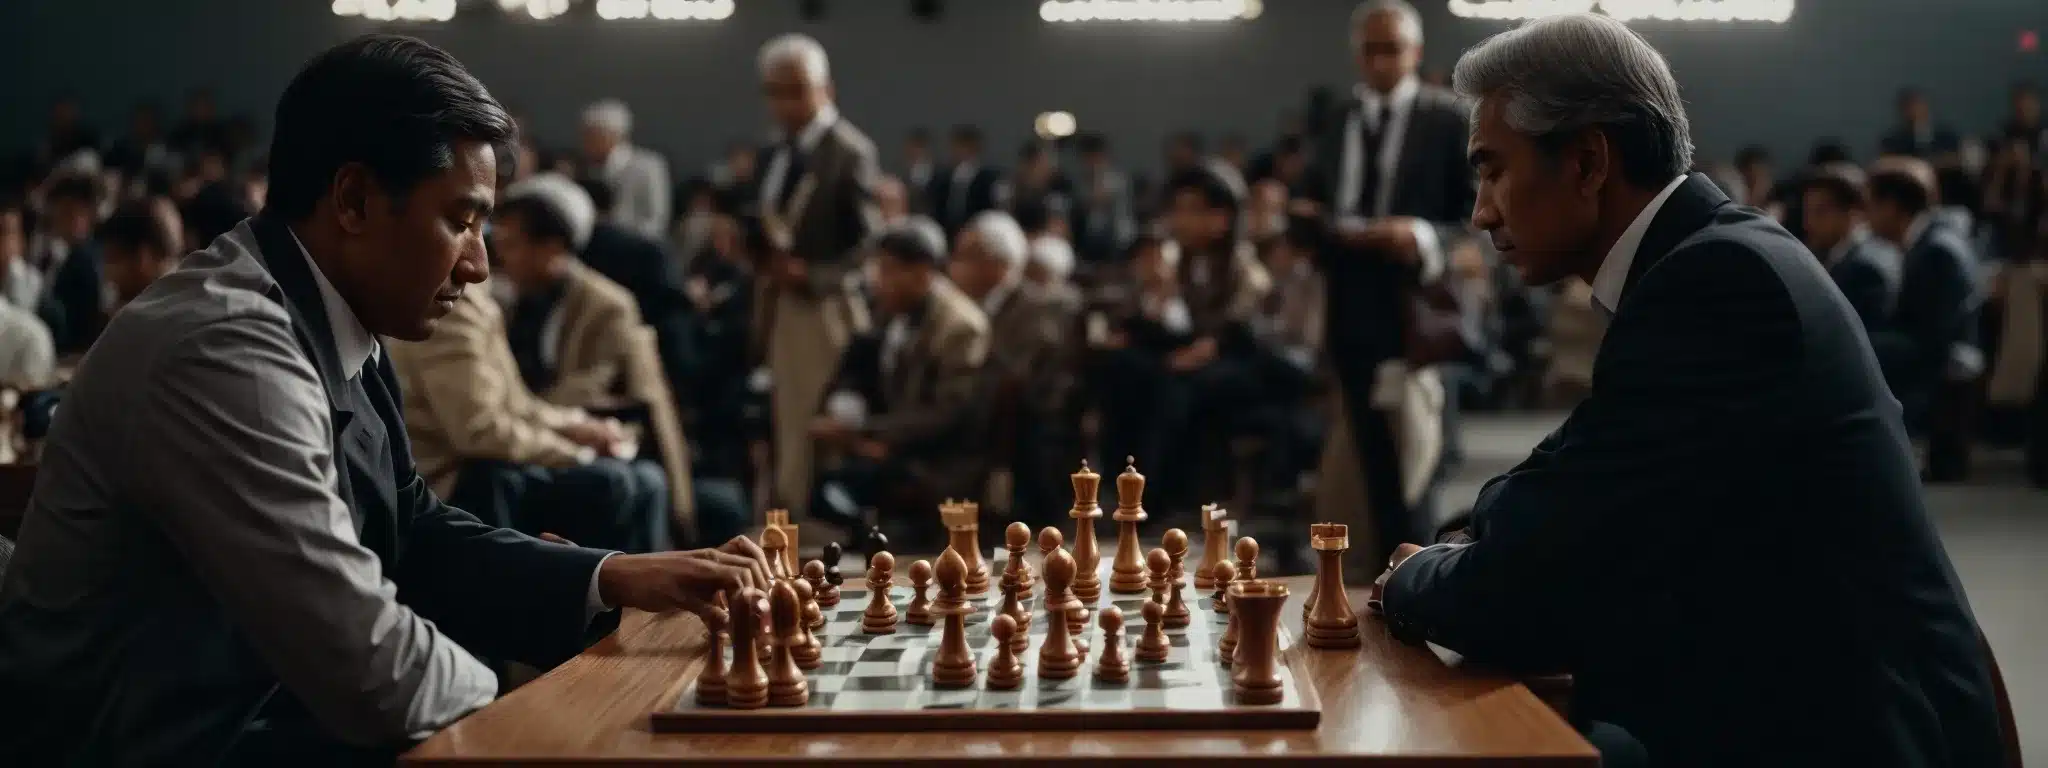 Two Strategic Thinkers Engaged In An Intense Game Of Chess, Surrounded By Blurred Silhouettes Of Spectators.